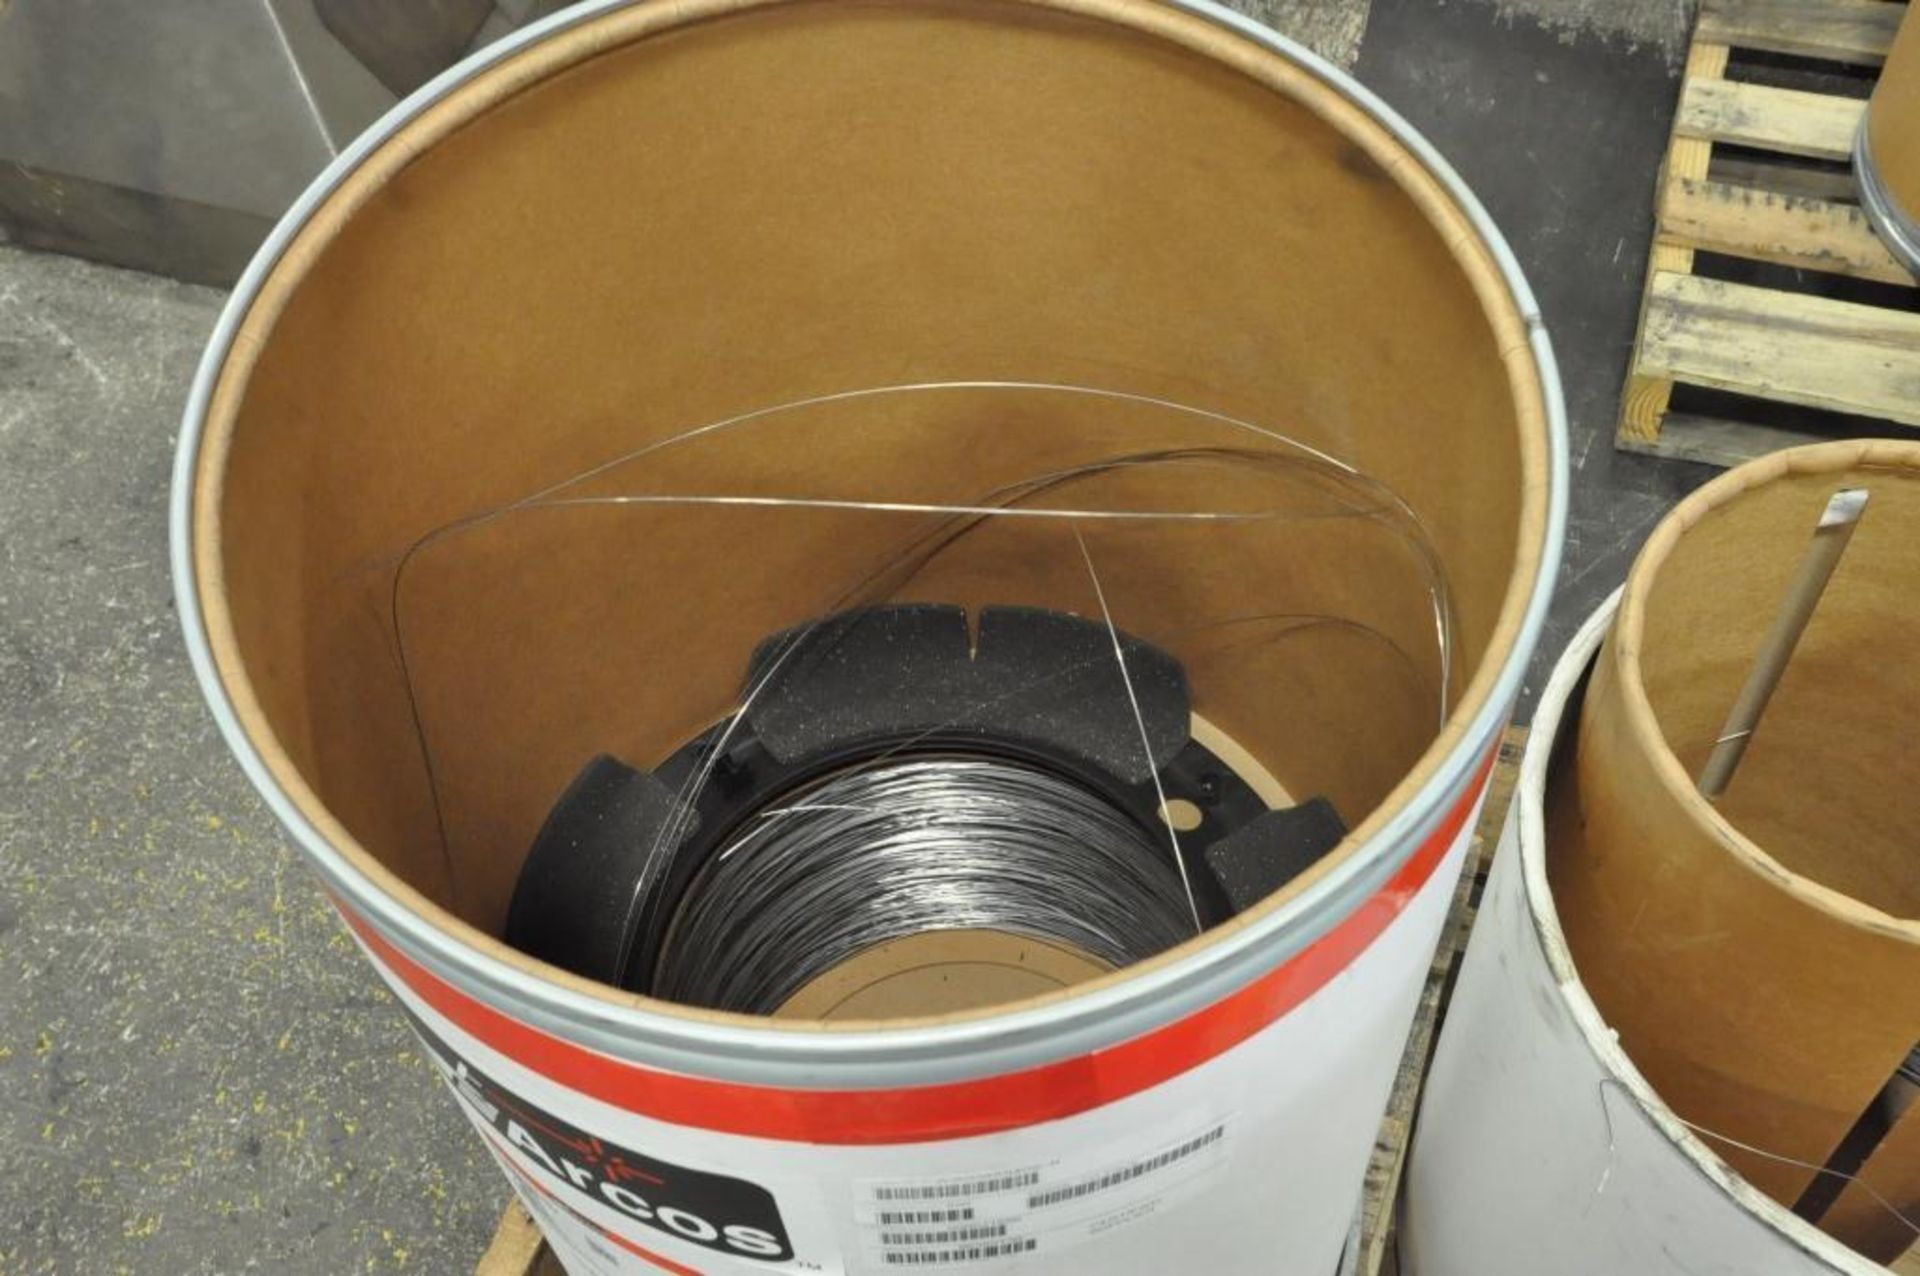 Lot-(2) Partial Drums of Mig Welding Wire, (B-11) - Image 3 of 3